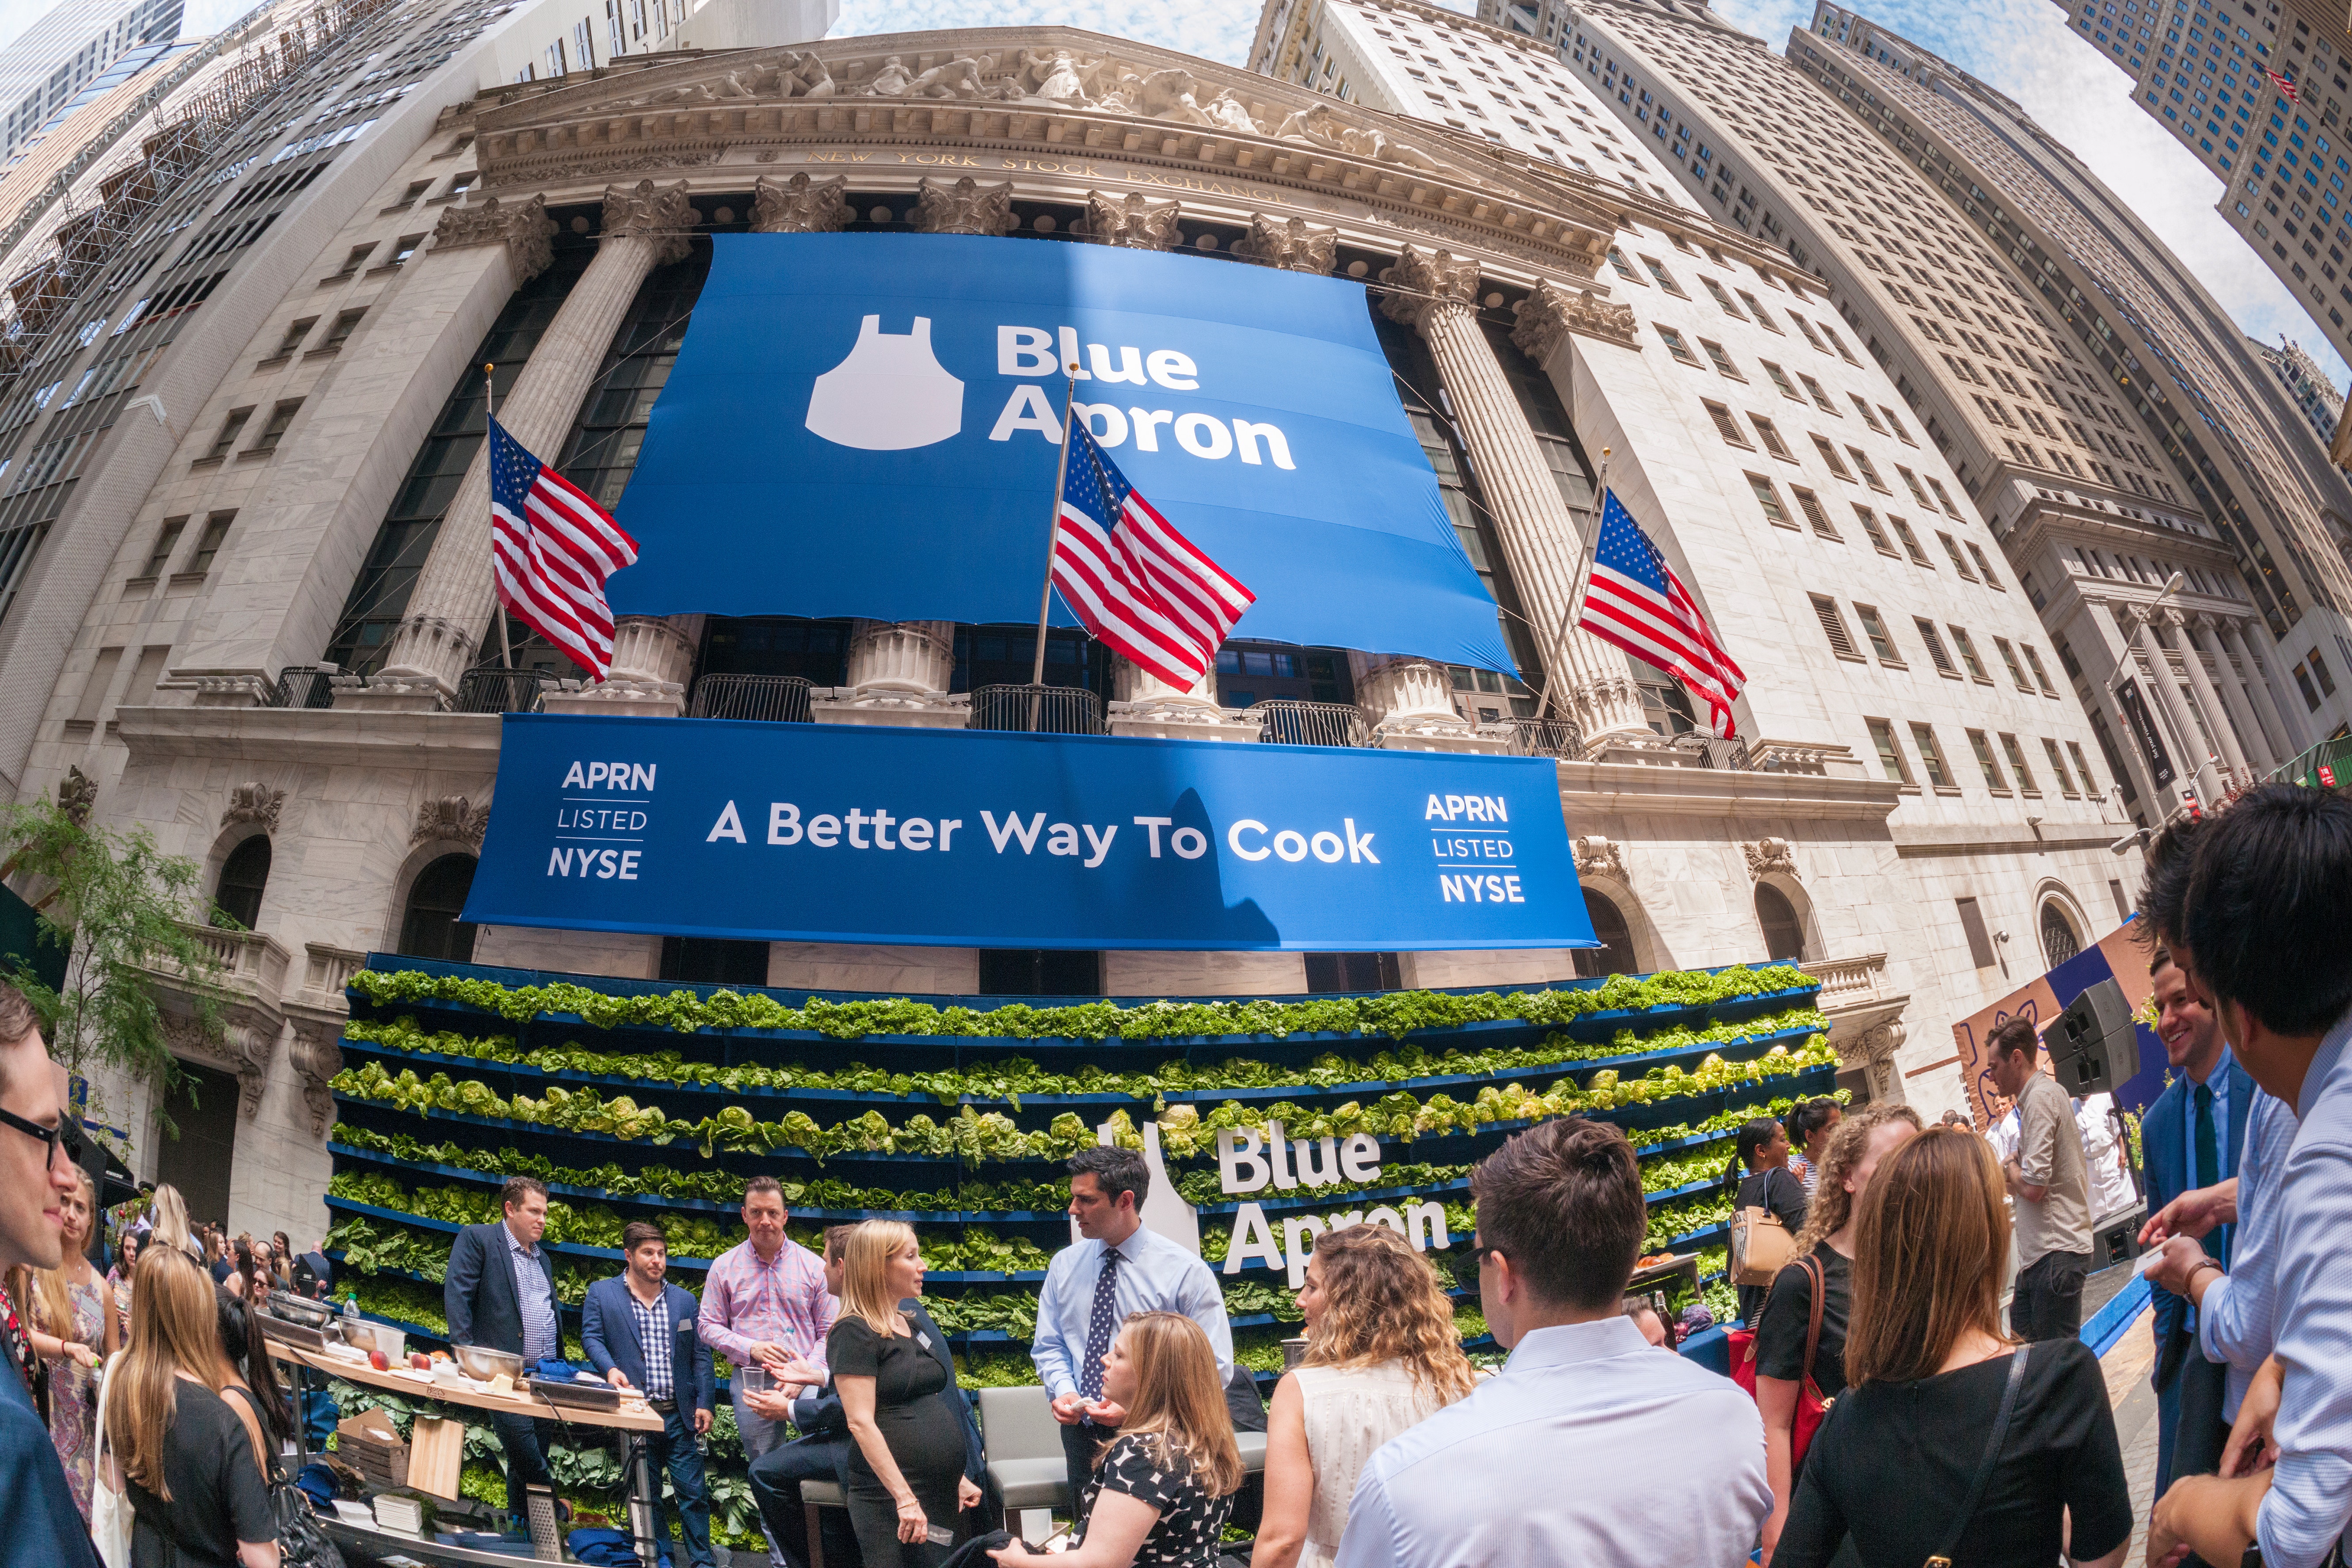 Bed, Bath & Beyond, Blue Apron Skyrocket In Latest Short Squeeze: What Investors Need To Know